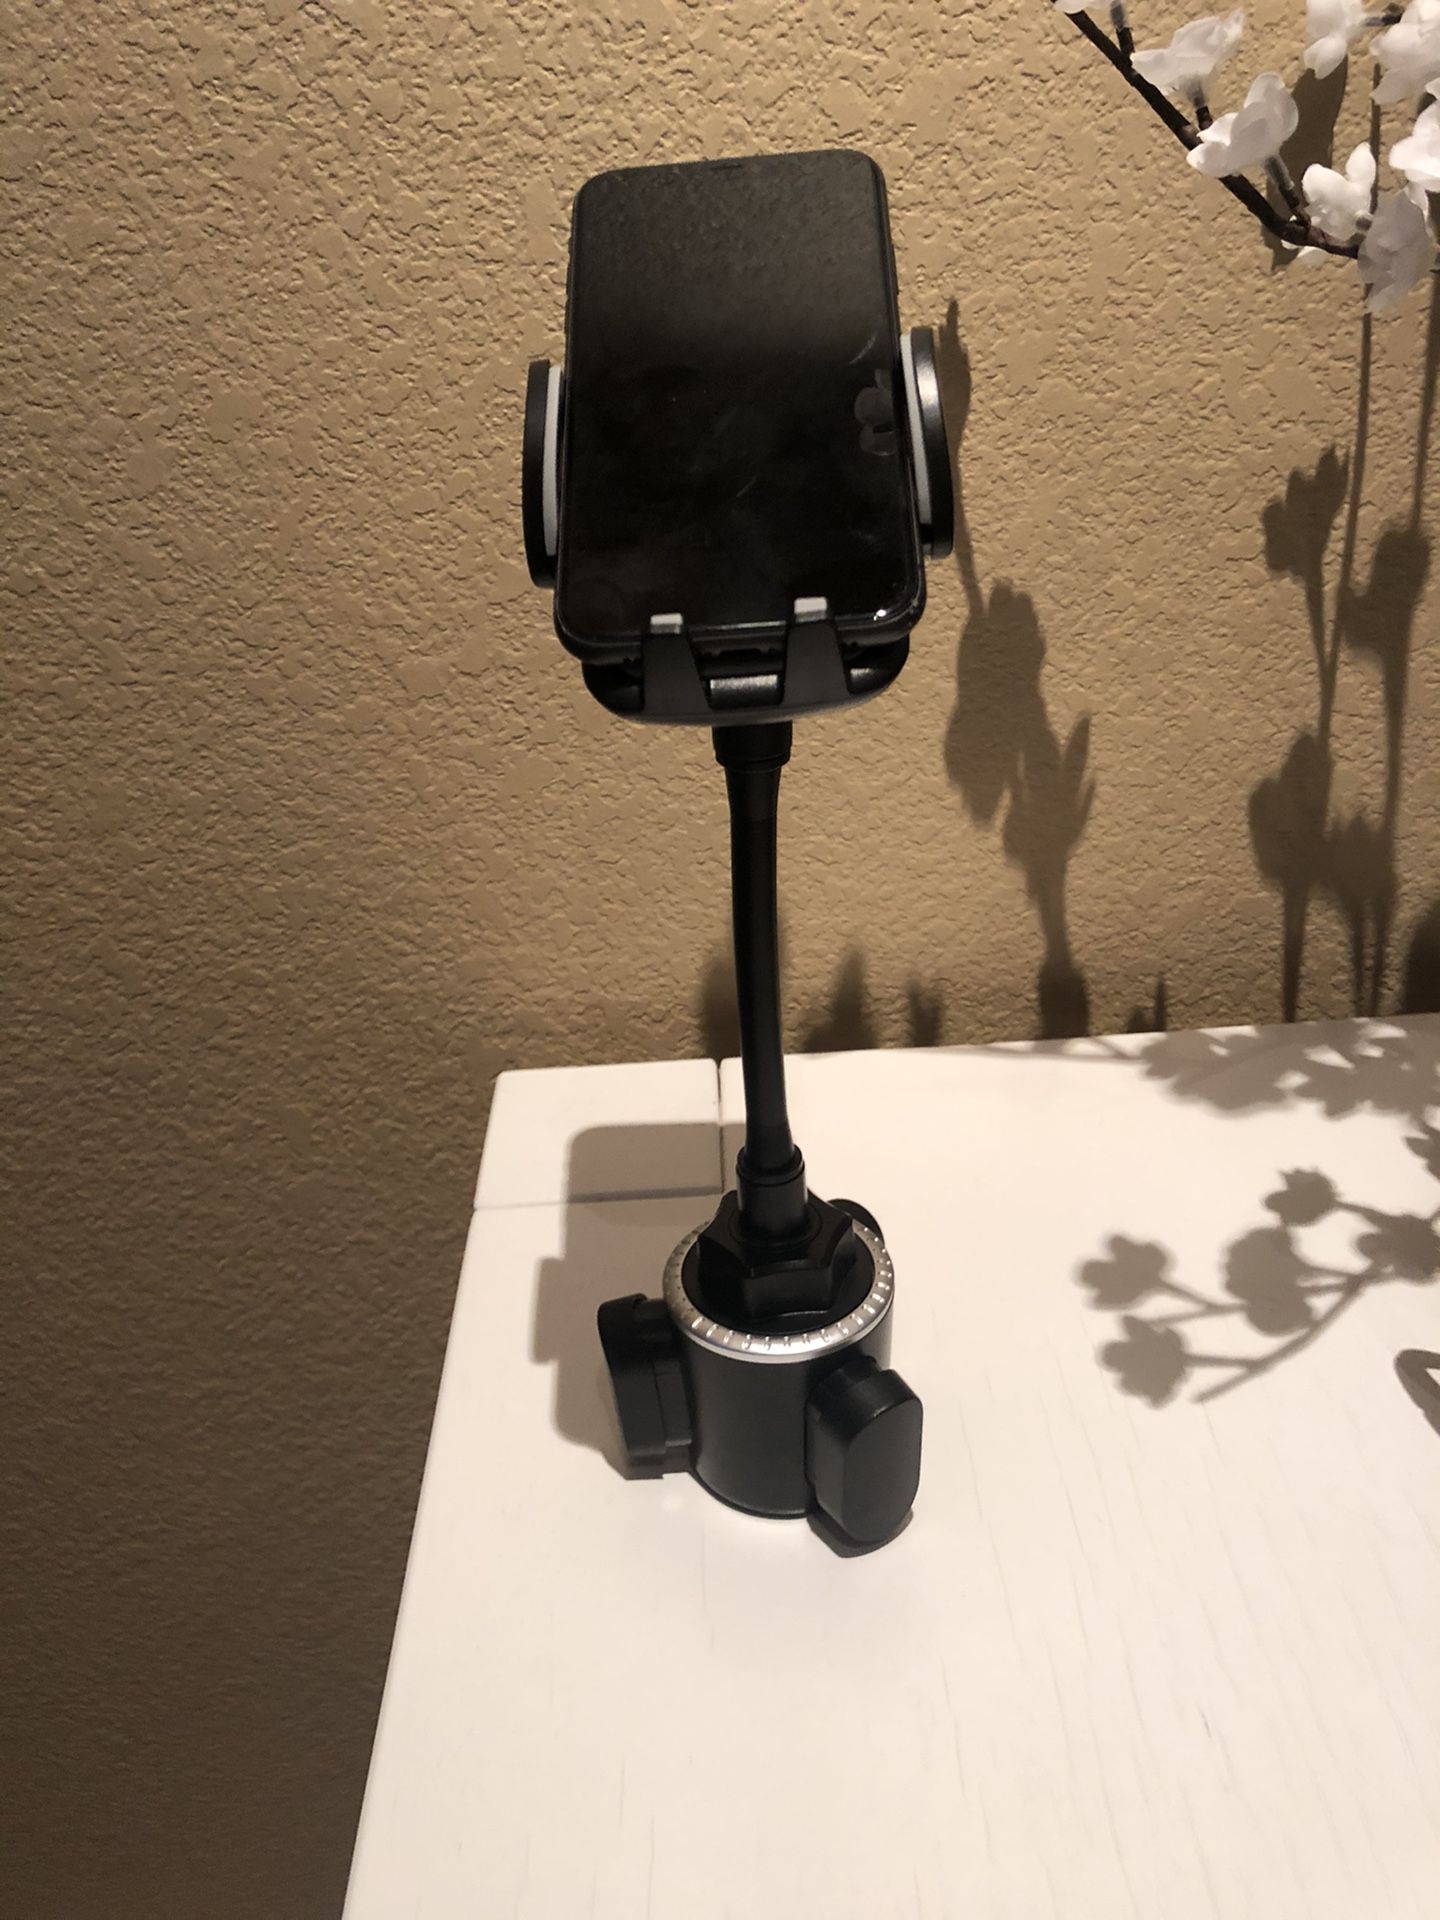 Sopownic Car Cup Holder Phone Mount